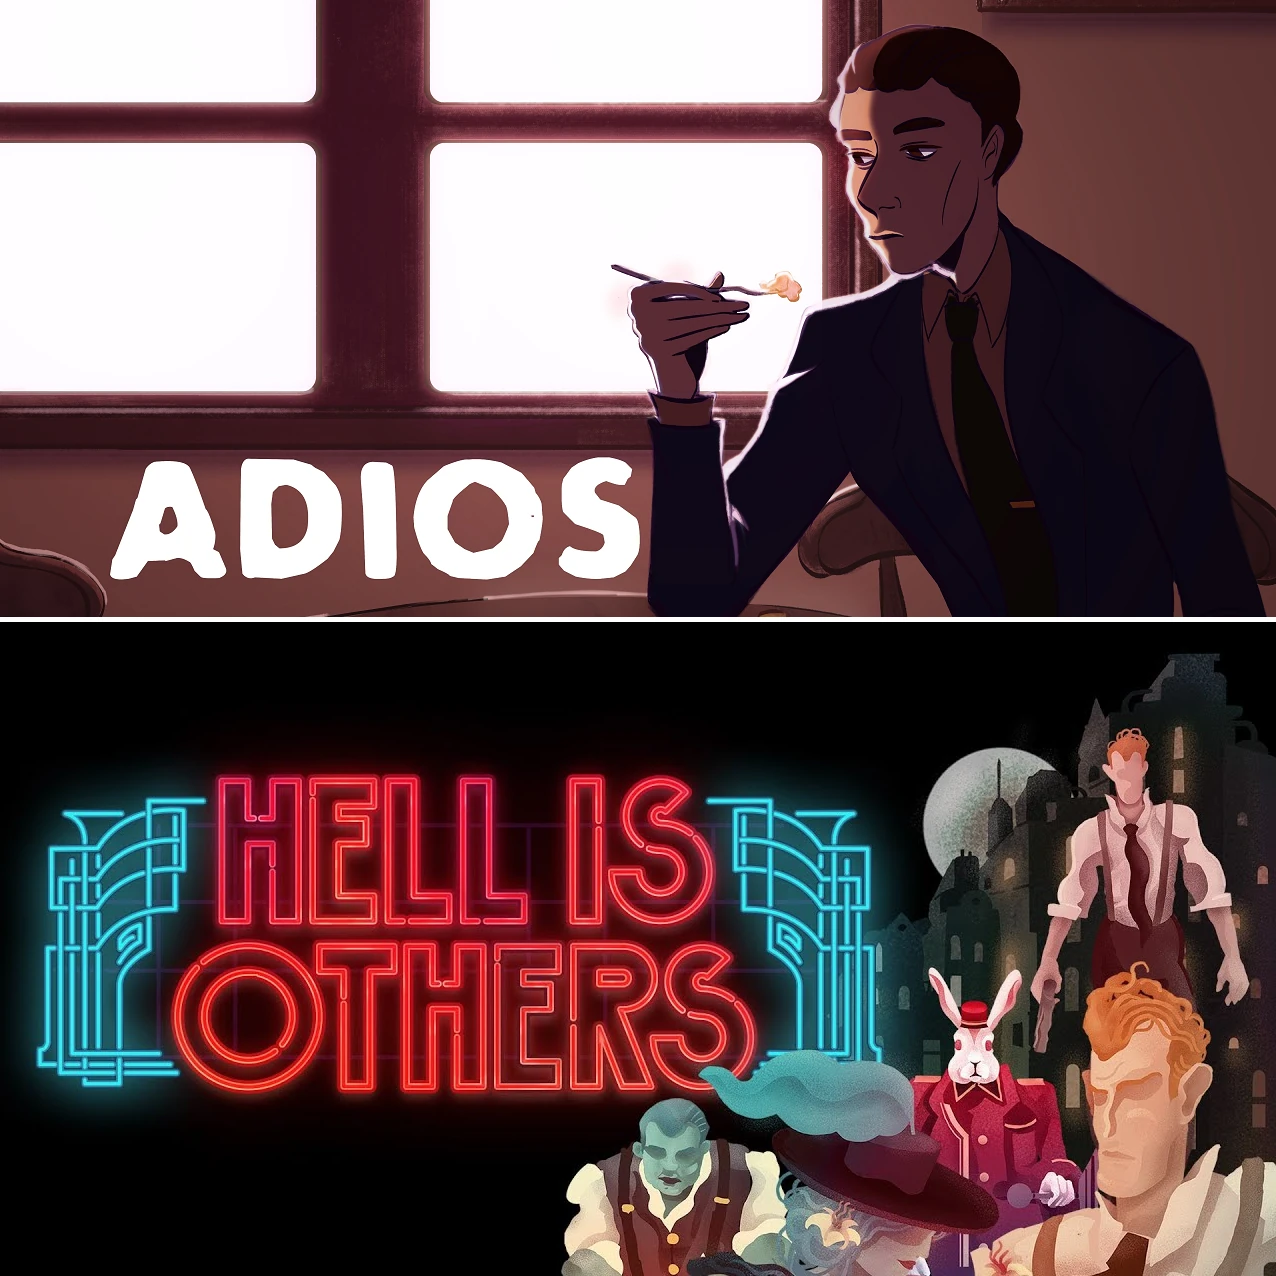 Adios + Hell is Others